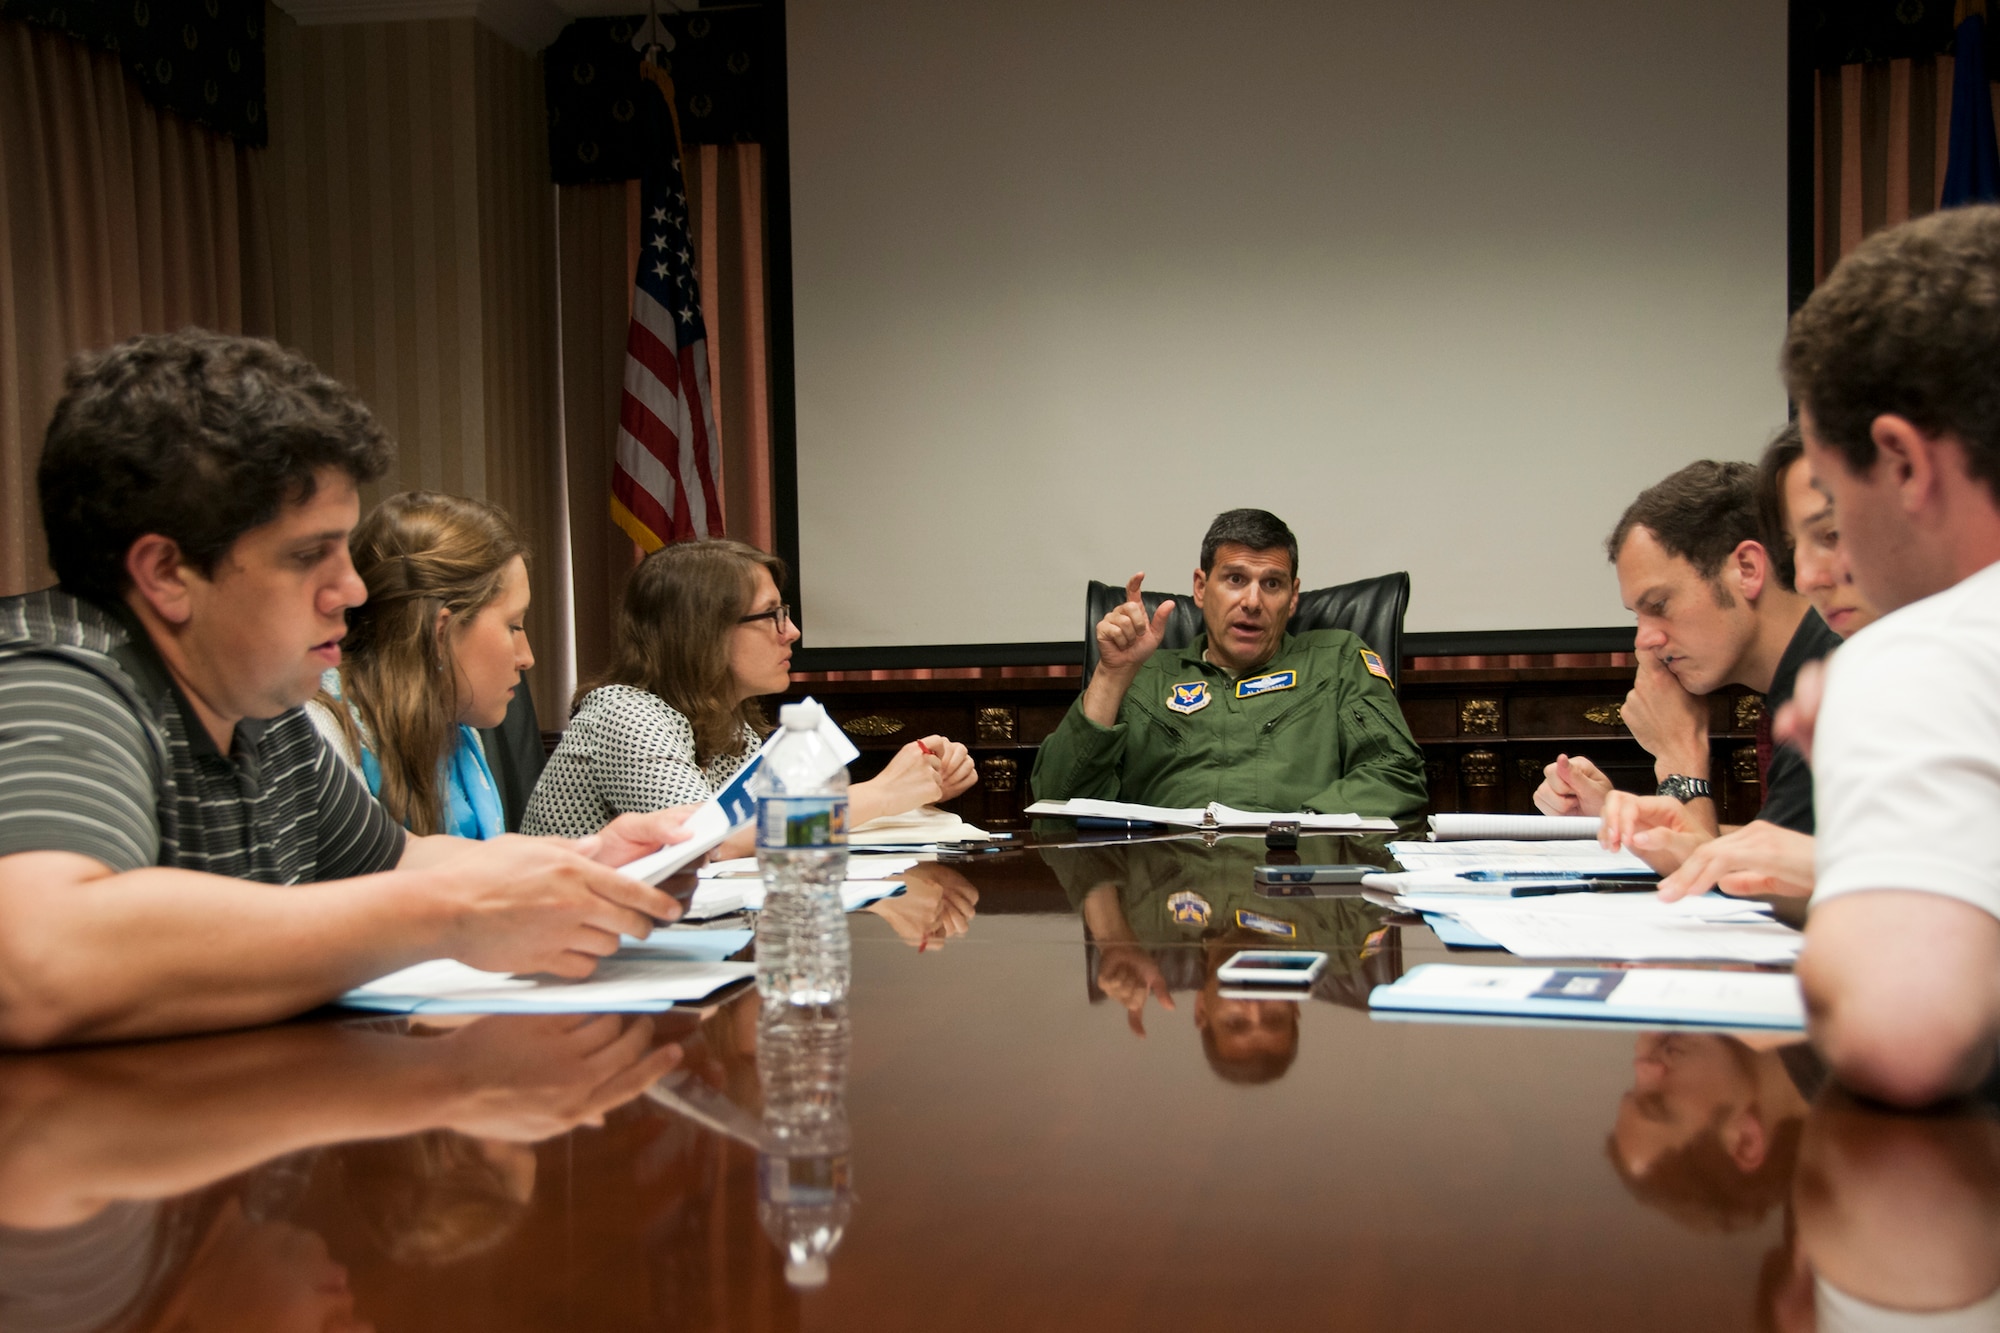 Brigadier Gen. Albert V. Lupenski, Headquarters U.S. Air Force Reserve Plans, Programs and Requirements director, provides an Air Force Reserve Command C-130 mission briefing to media at the distinguished visitor’s lounge at the passenger terminal at Joint Base Andrews, Md., June 28, 2016. In honor of the 100th anniversary of U.S. air reserve power, media members were invited to an event showcasing special missions conducted by C-130s in AFRC, to include weather surveillance, firefighting and aerial spraying. (U.S. Air Force photo/Staff Sgt. Kat Justen) 